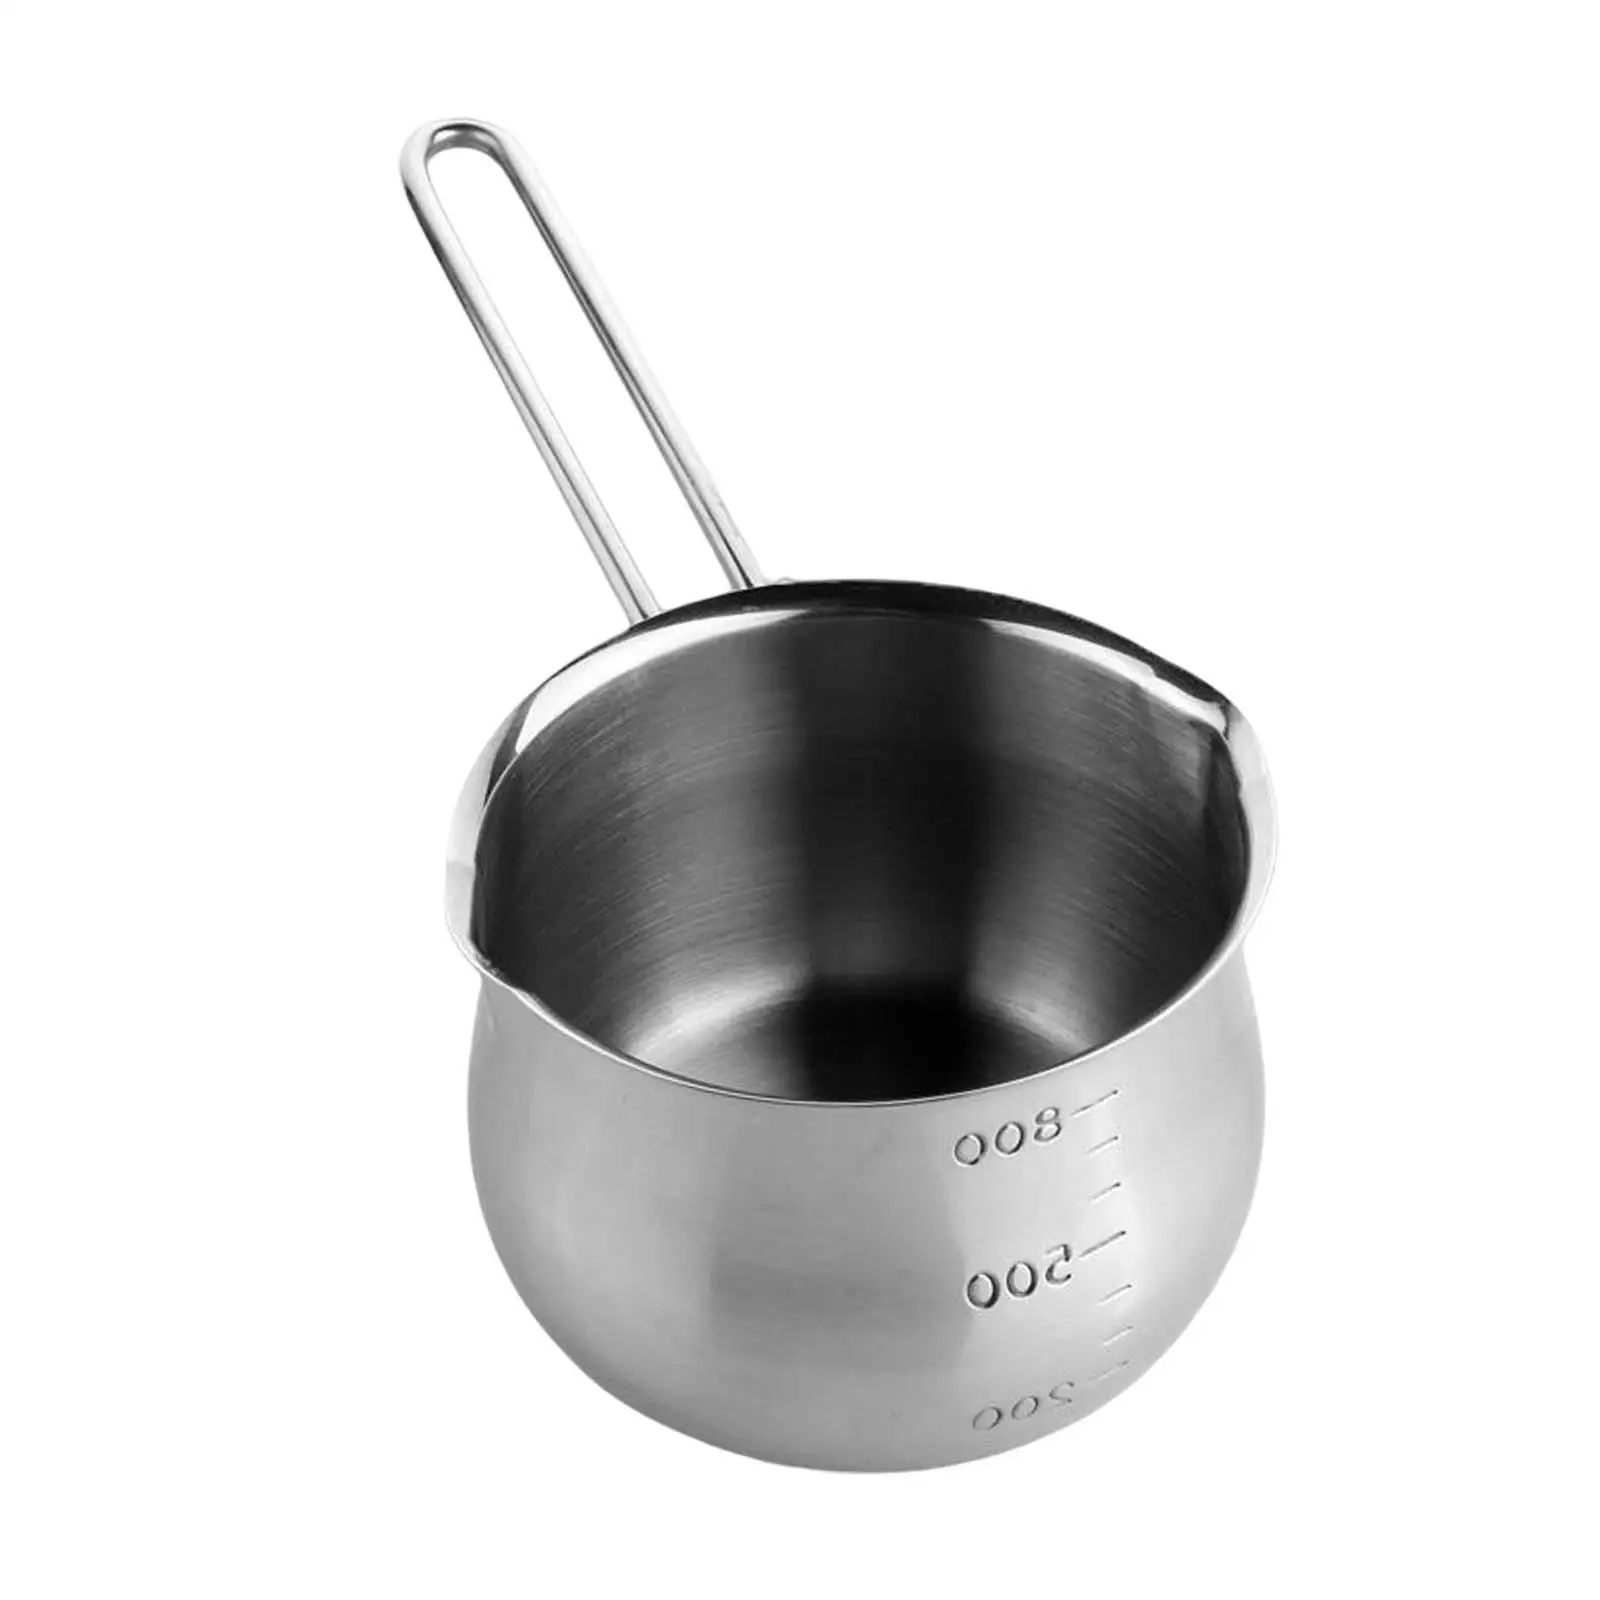 Stainless Steel Small Milk Pot Coffee Pot with Handle Cookware for Camping